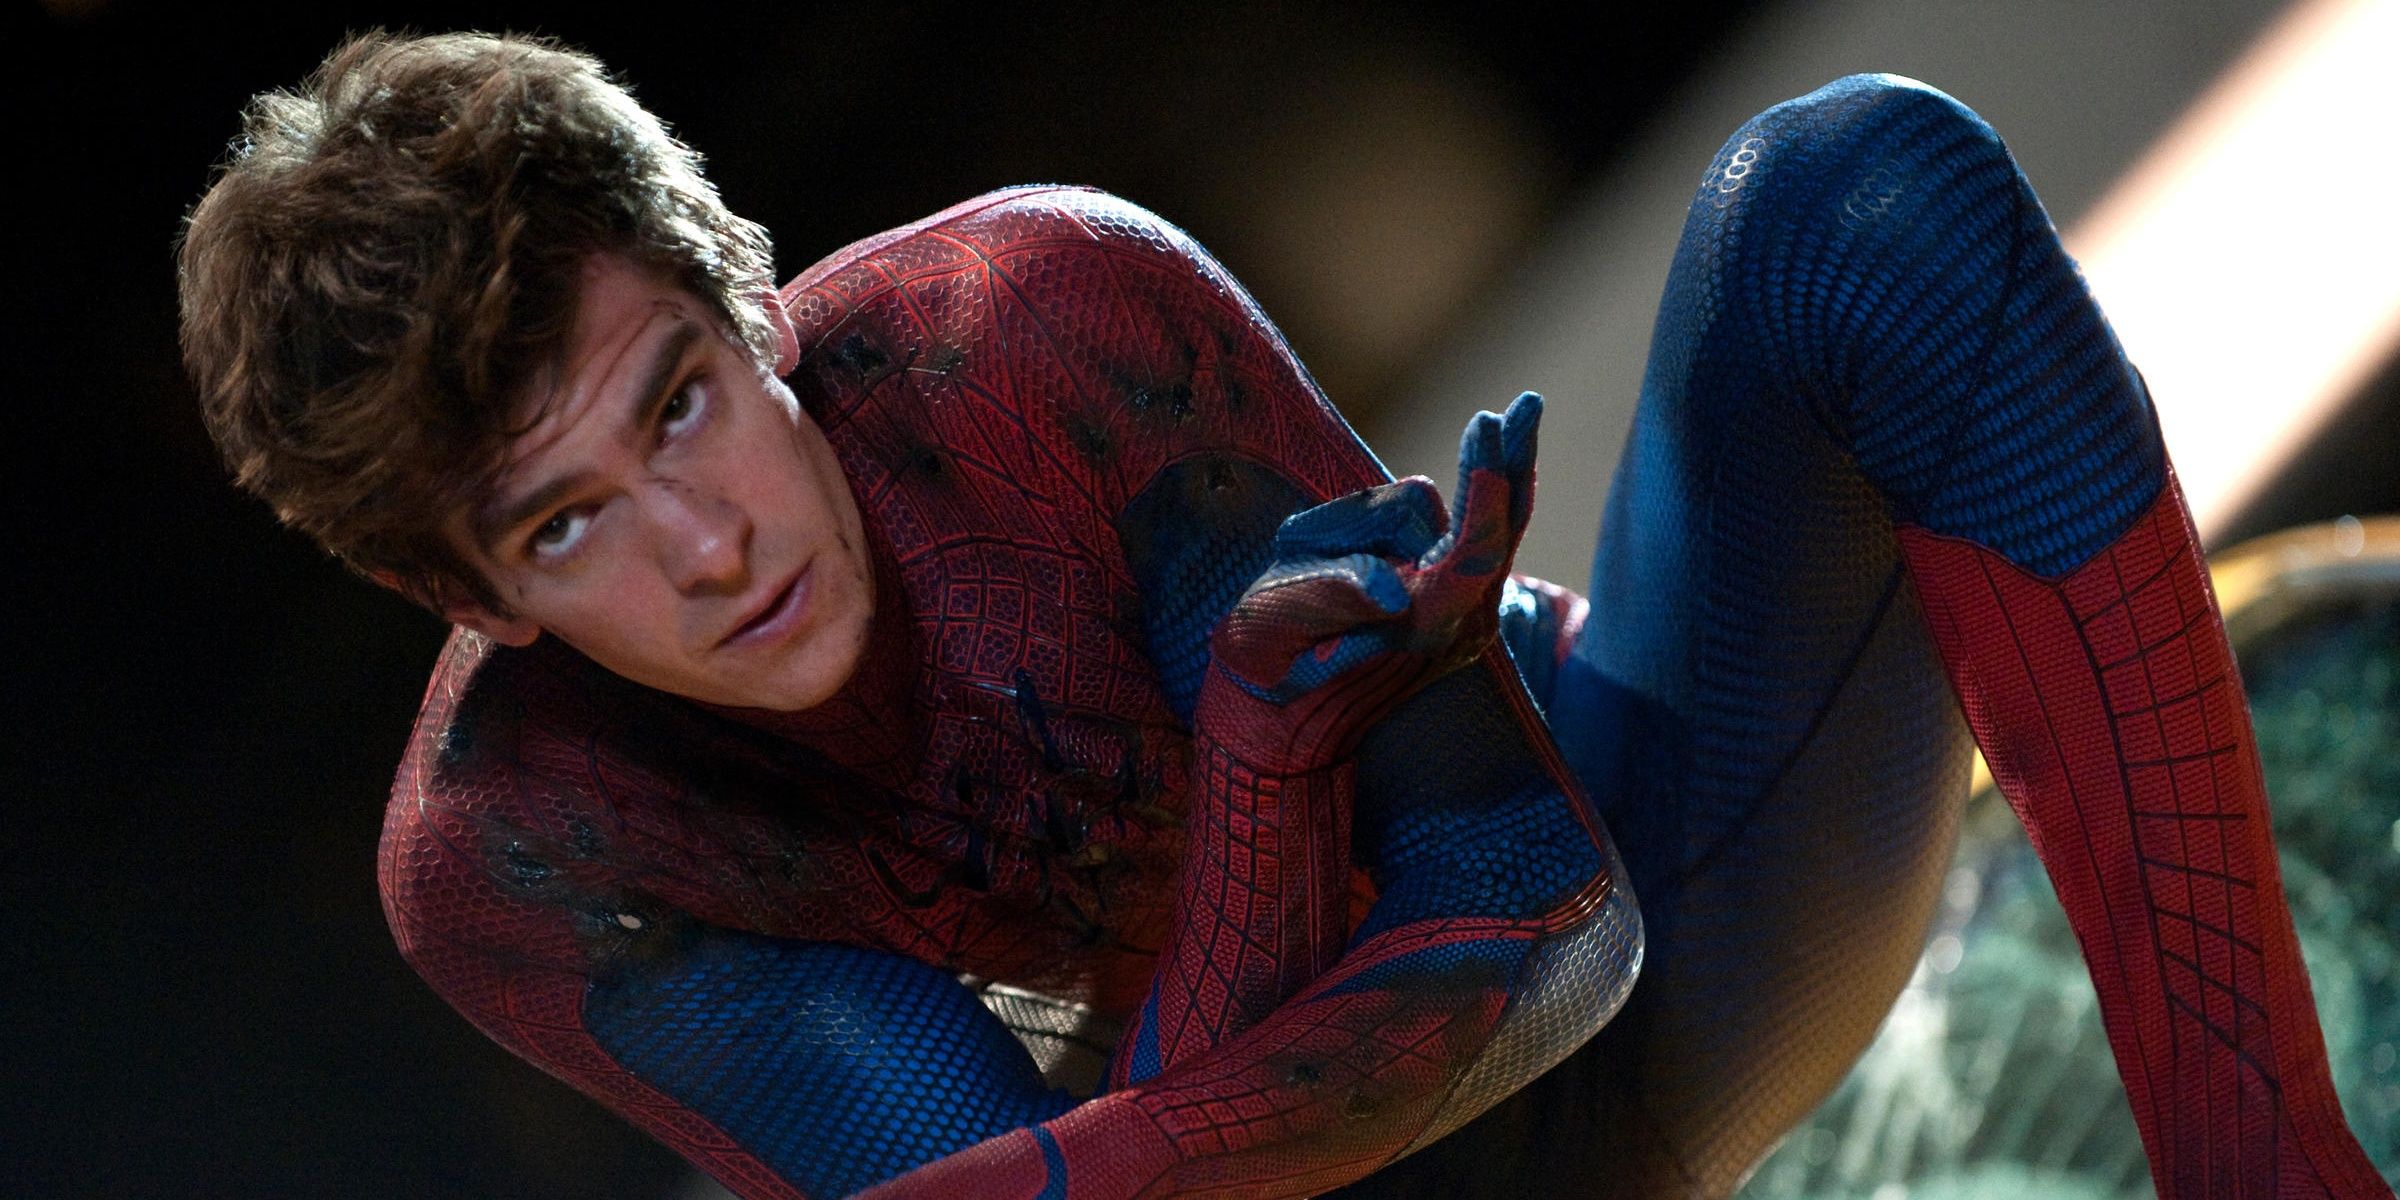 Andrew Garfield in Spider-Man suit with arms crossed